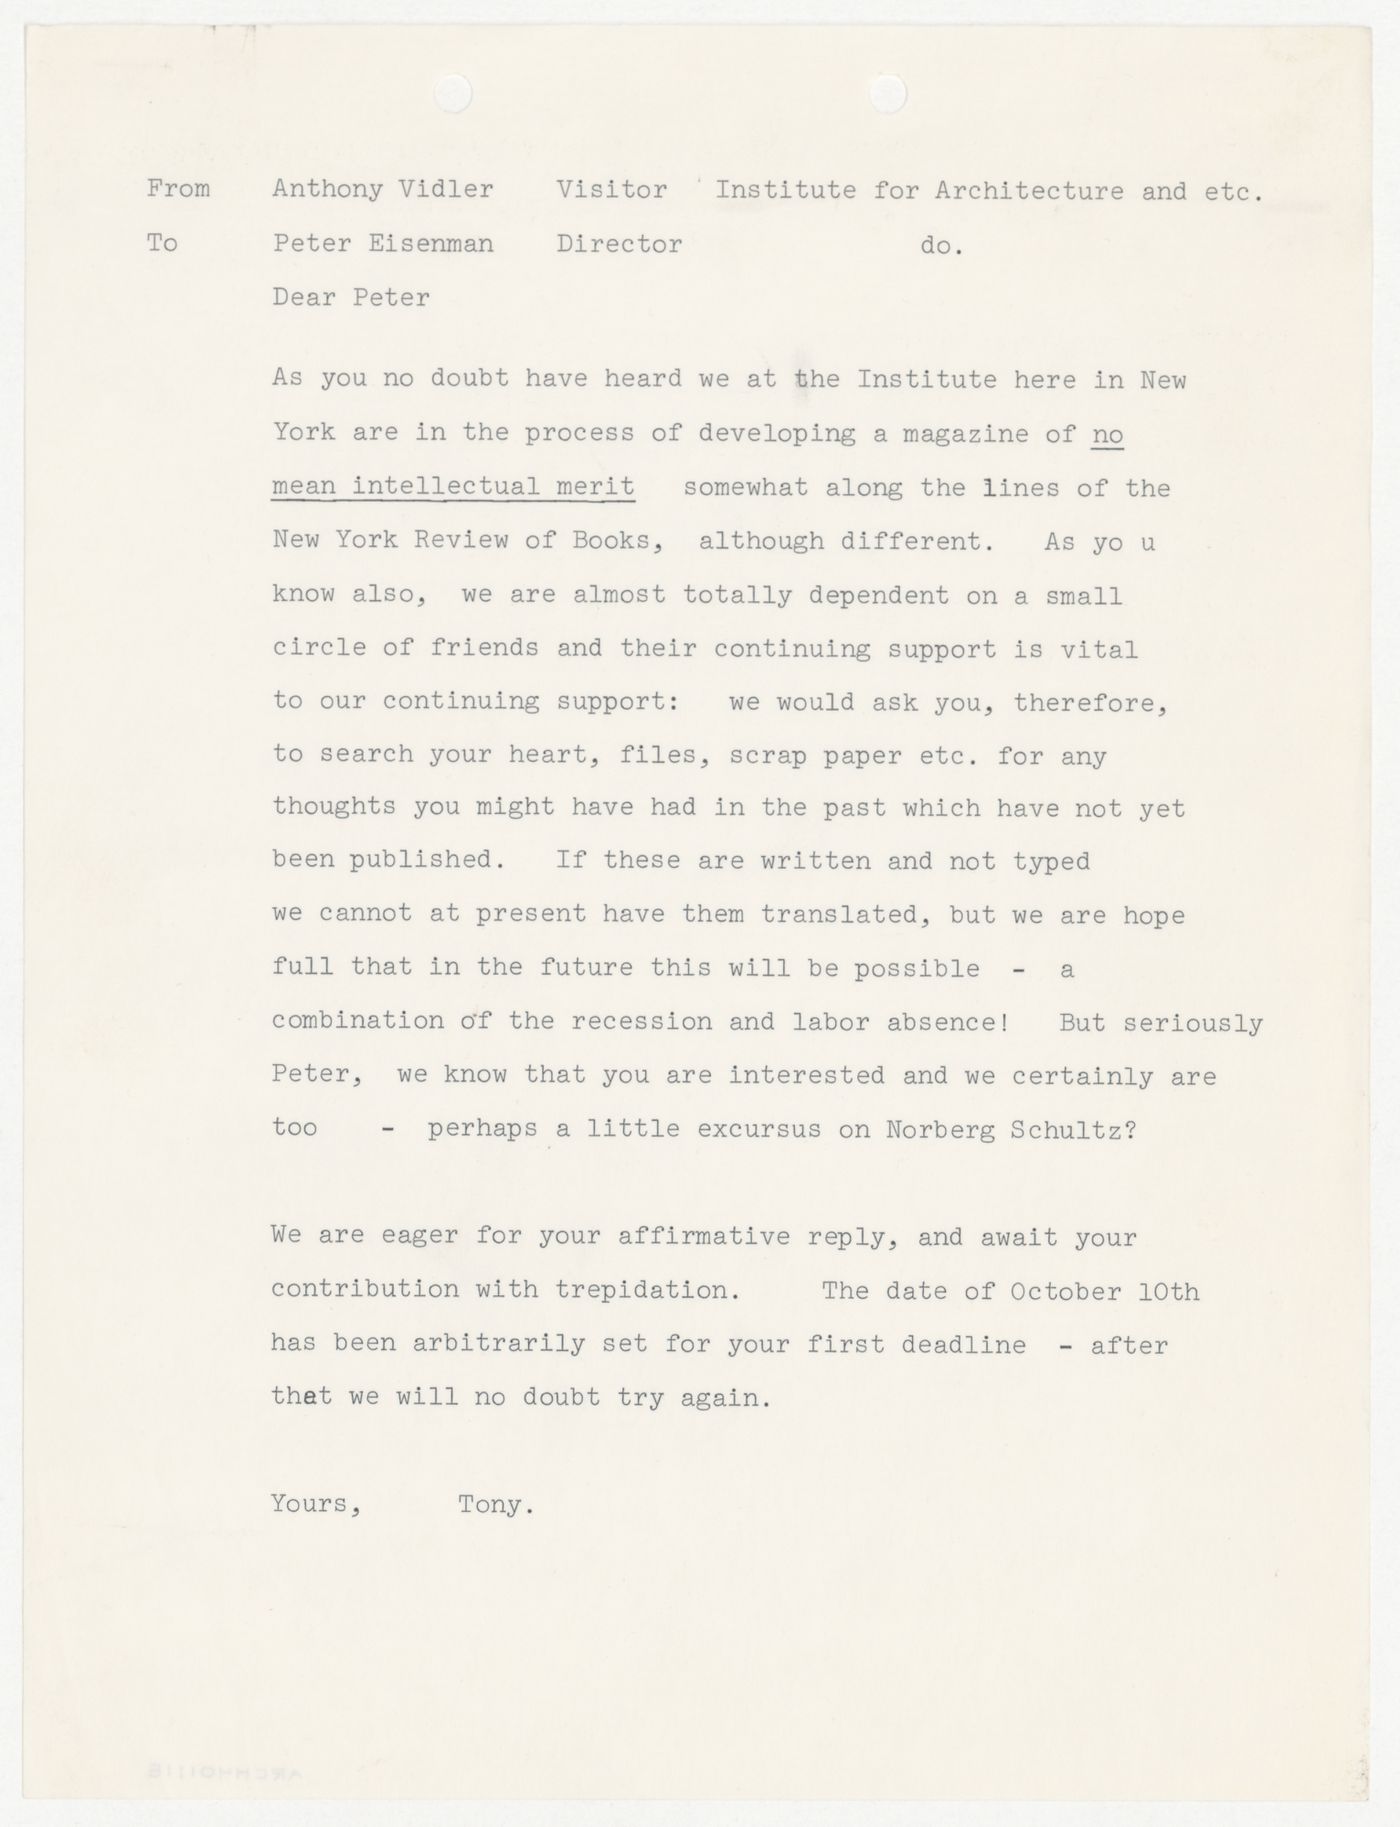 Memorandum from Anthony Vidler to Peter D. Eisenman soliciting contribution to a magazine